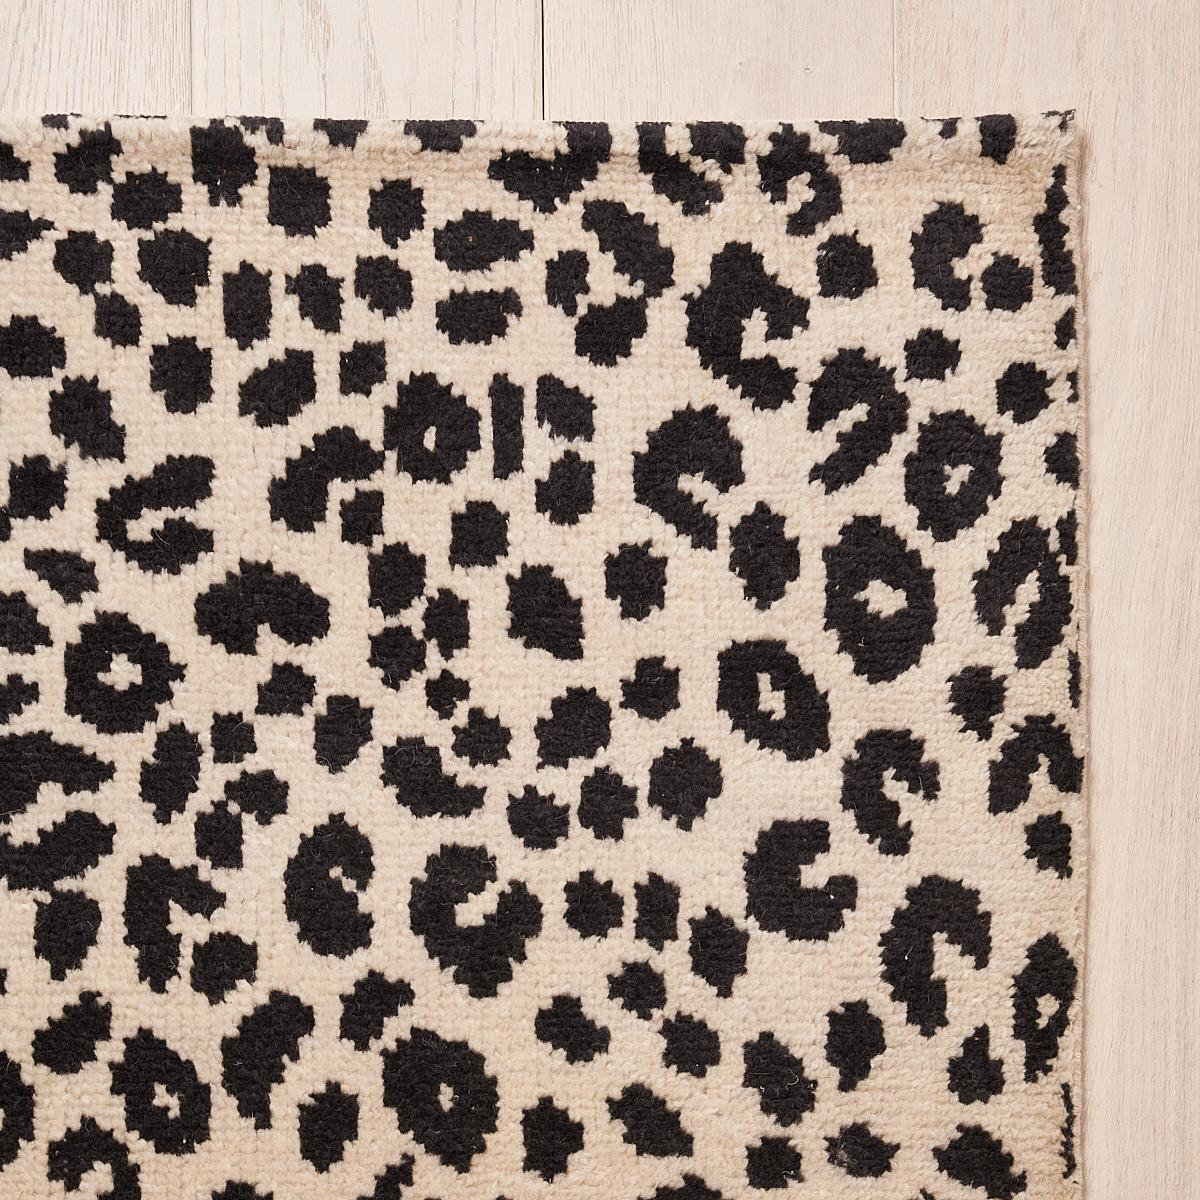 This rug will ship in December. A versatile and wildly chic hand-knotted design made of wool and cotton, Iconic Leopard features a dense, allover animal motif with fabulous dimension. Inspired by our bestselling Iconic Leopard pattern, this rug